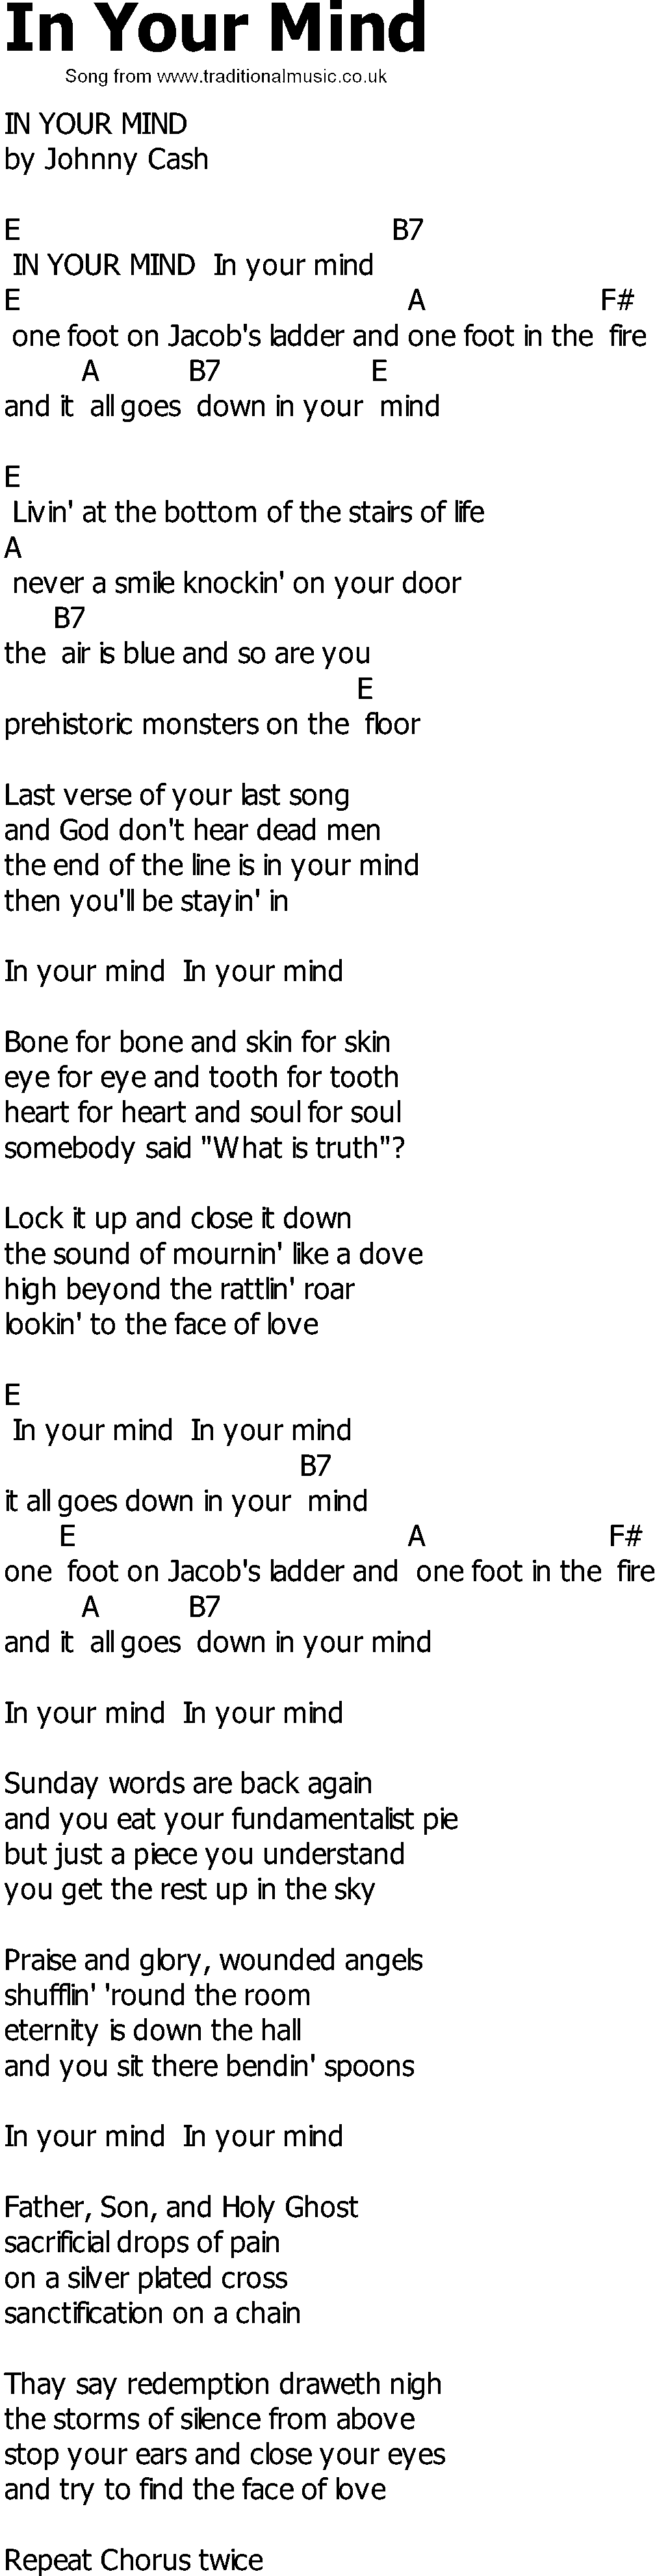 Old Country song lyrics with chords - In Your Mind